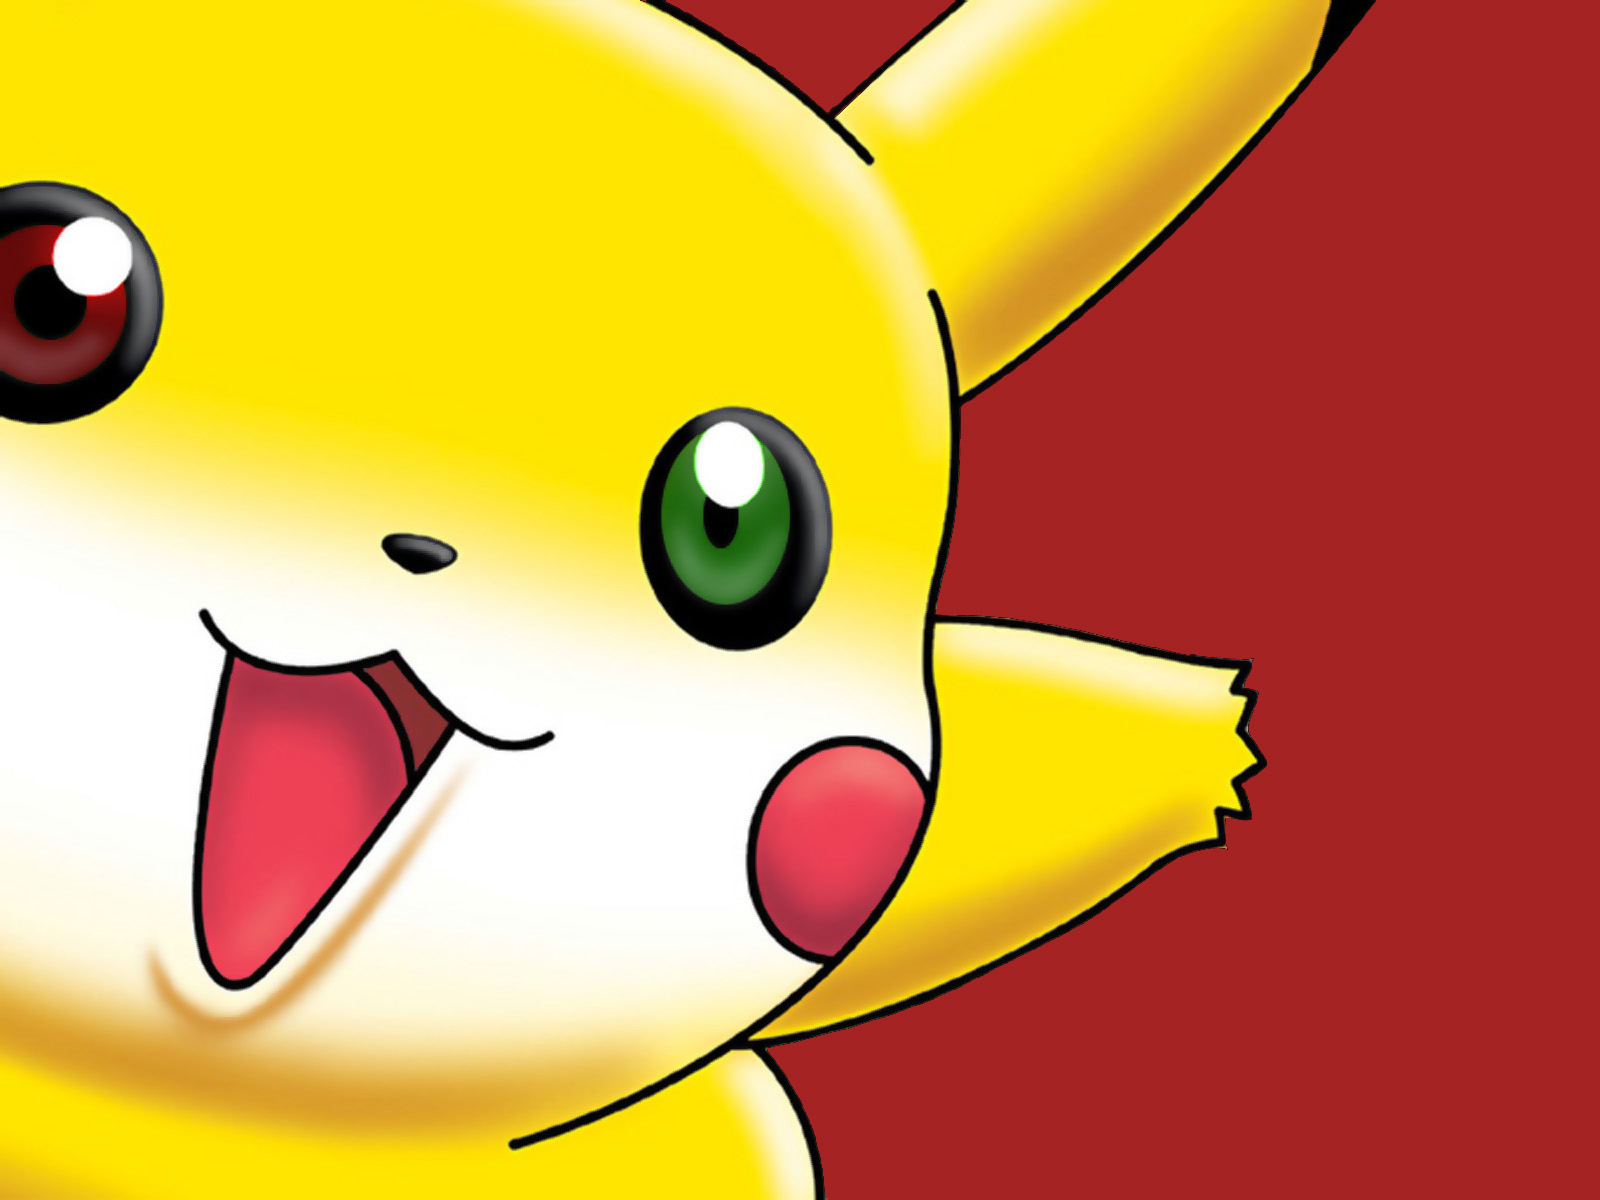 Pikachu sitting on a branch with a colorful background.